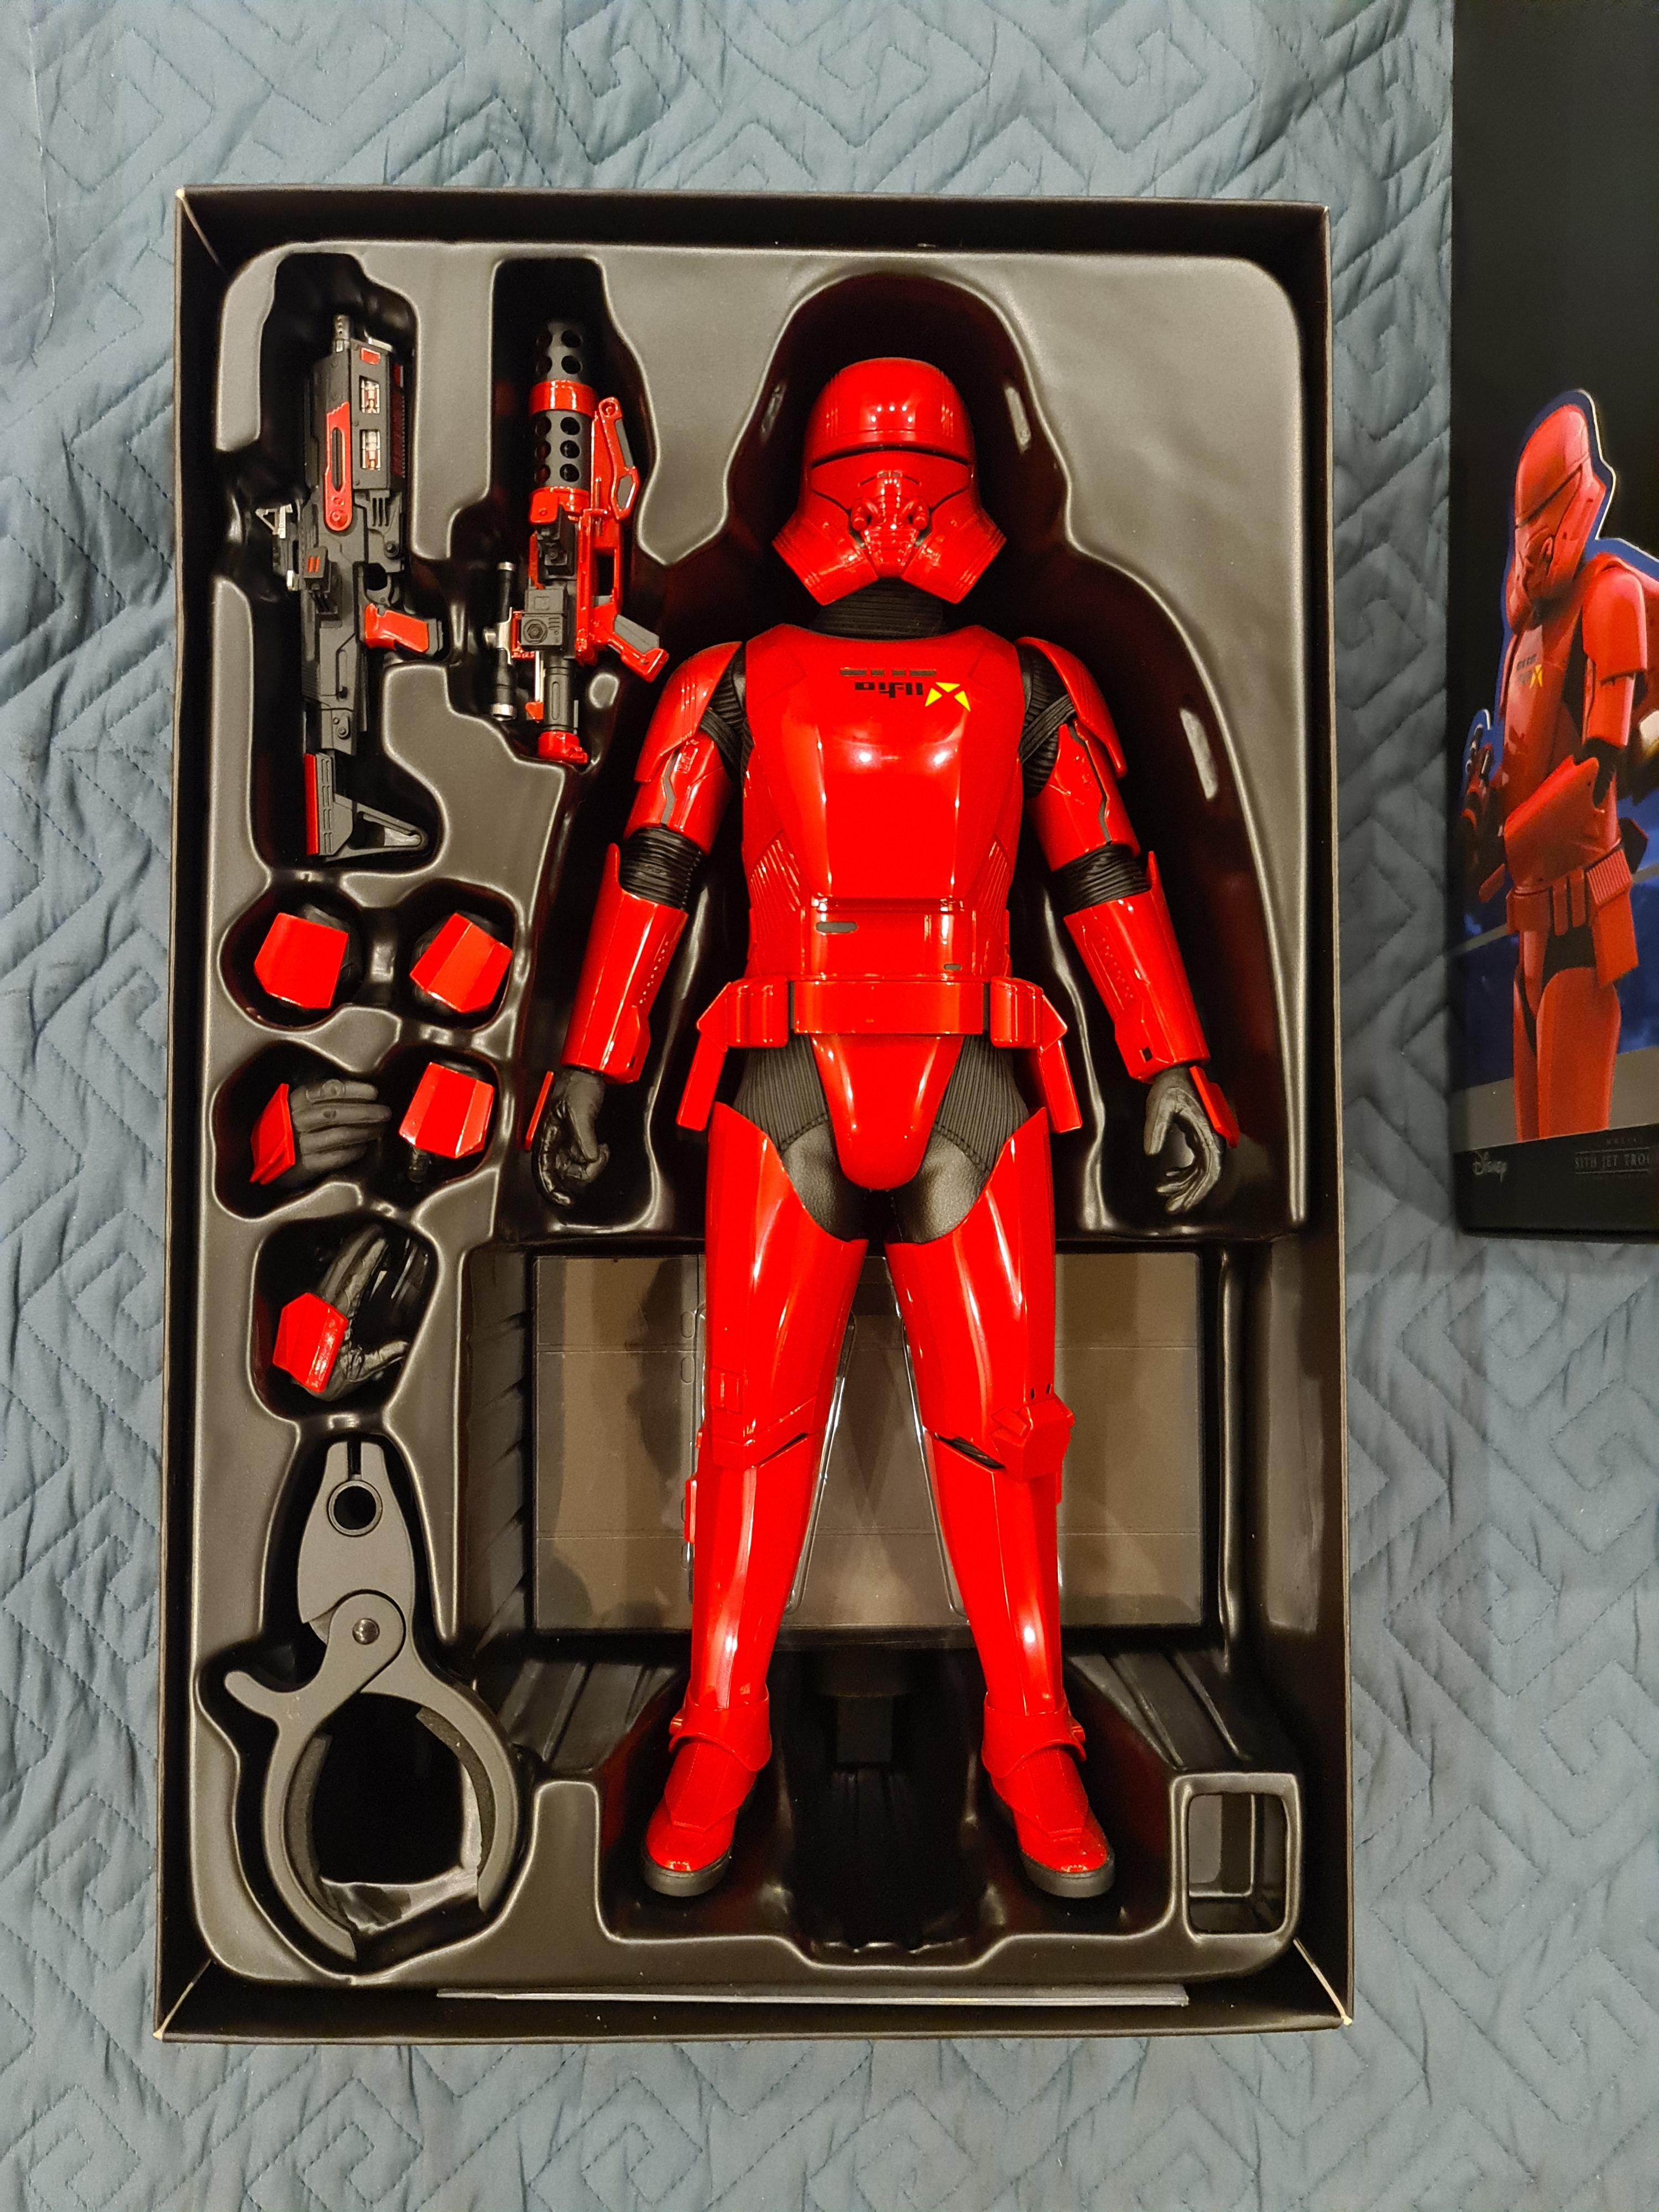 Hot Toys - Sith Jet Trooper - 1:6 Scale Collectible - The Rise of Skywalker - Movie Masterpiece Series HOT TOYS